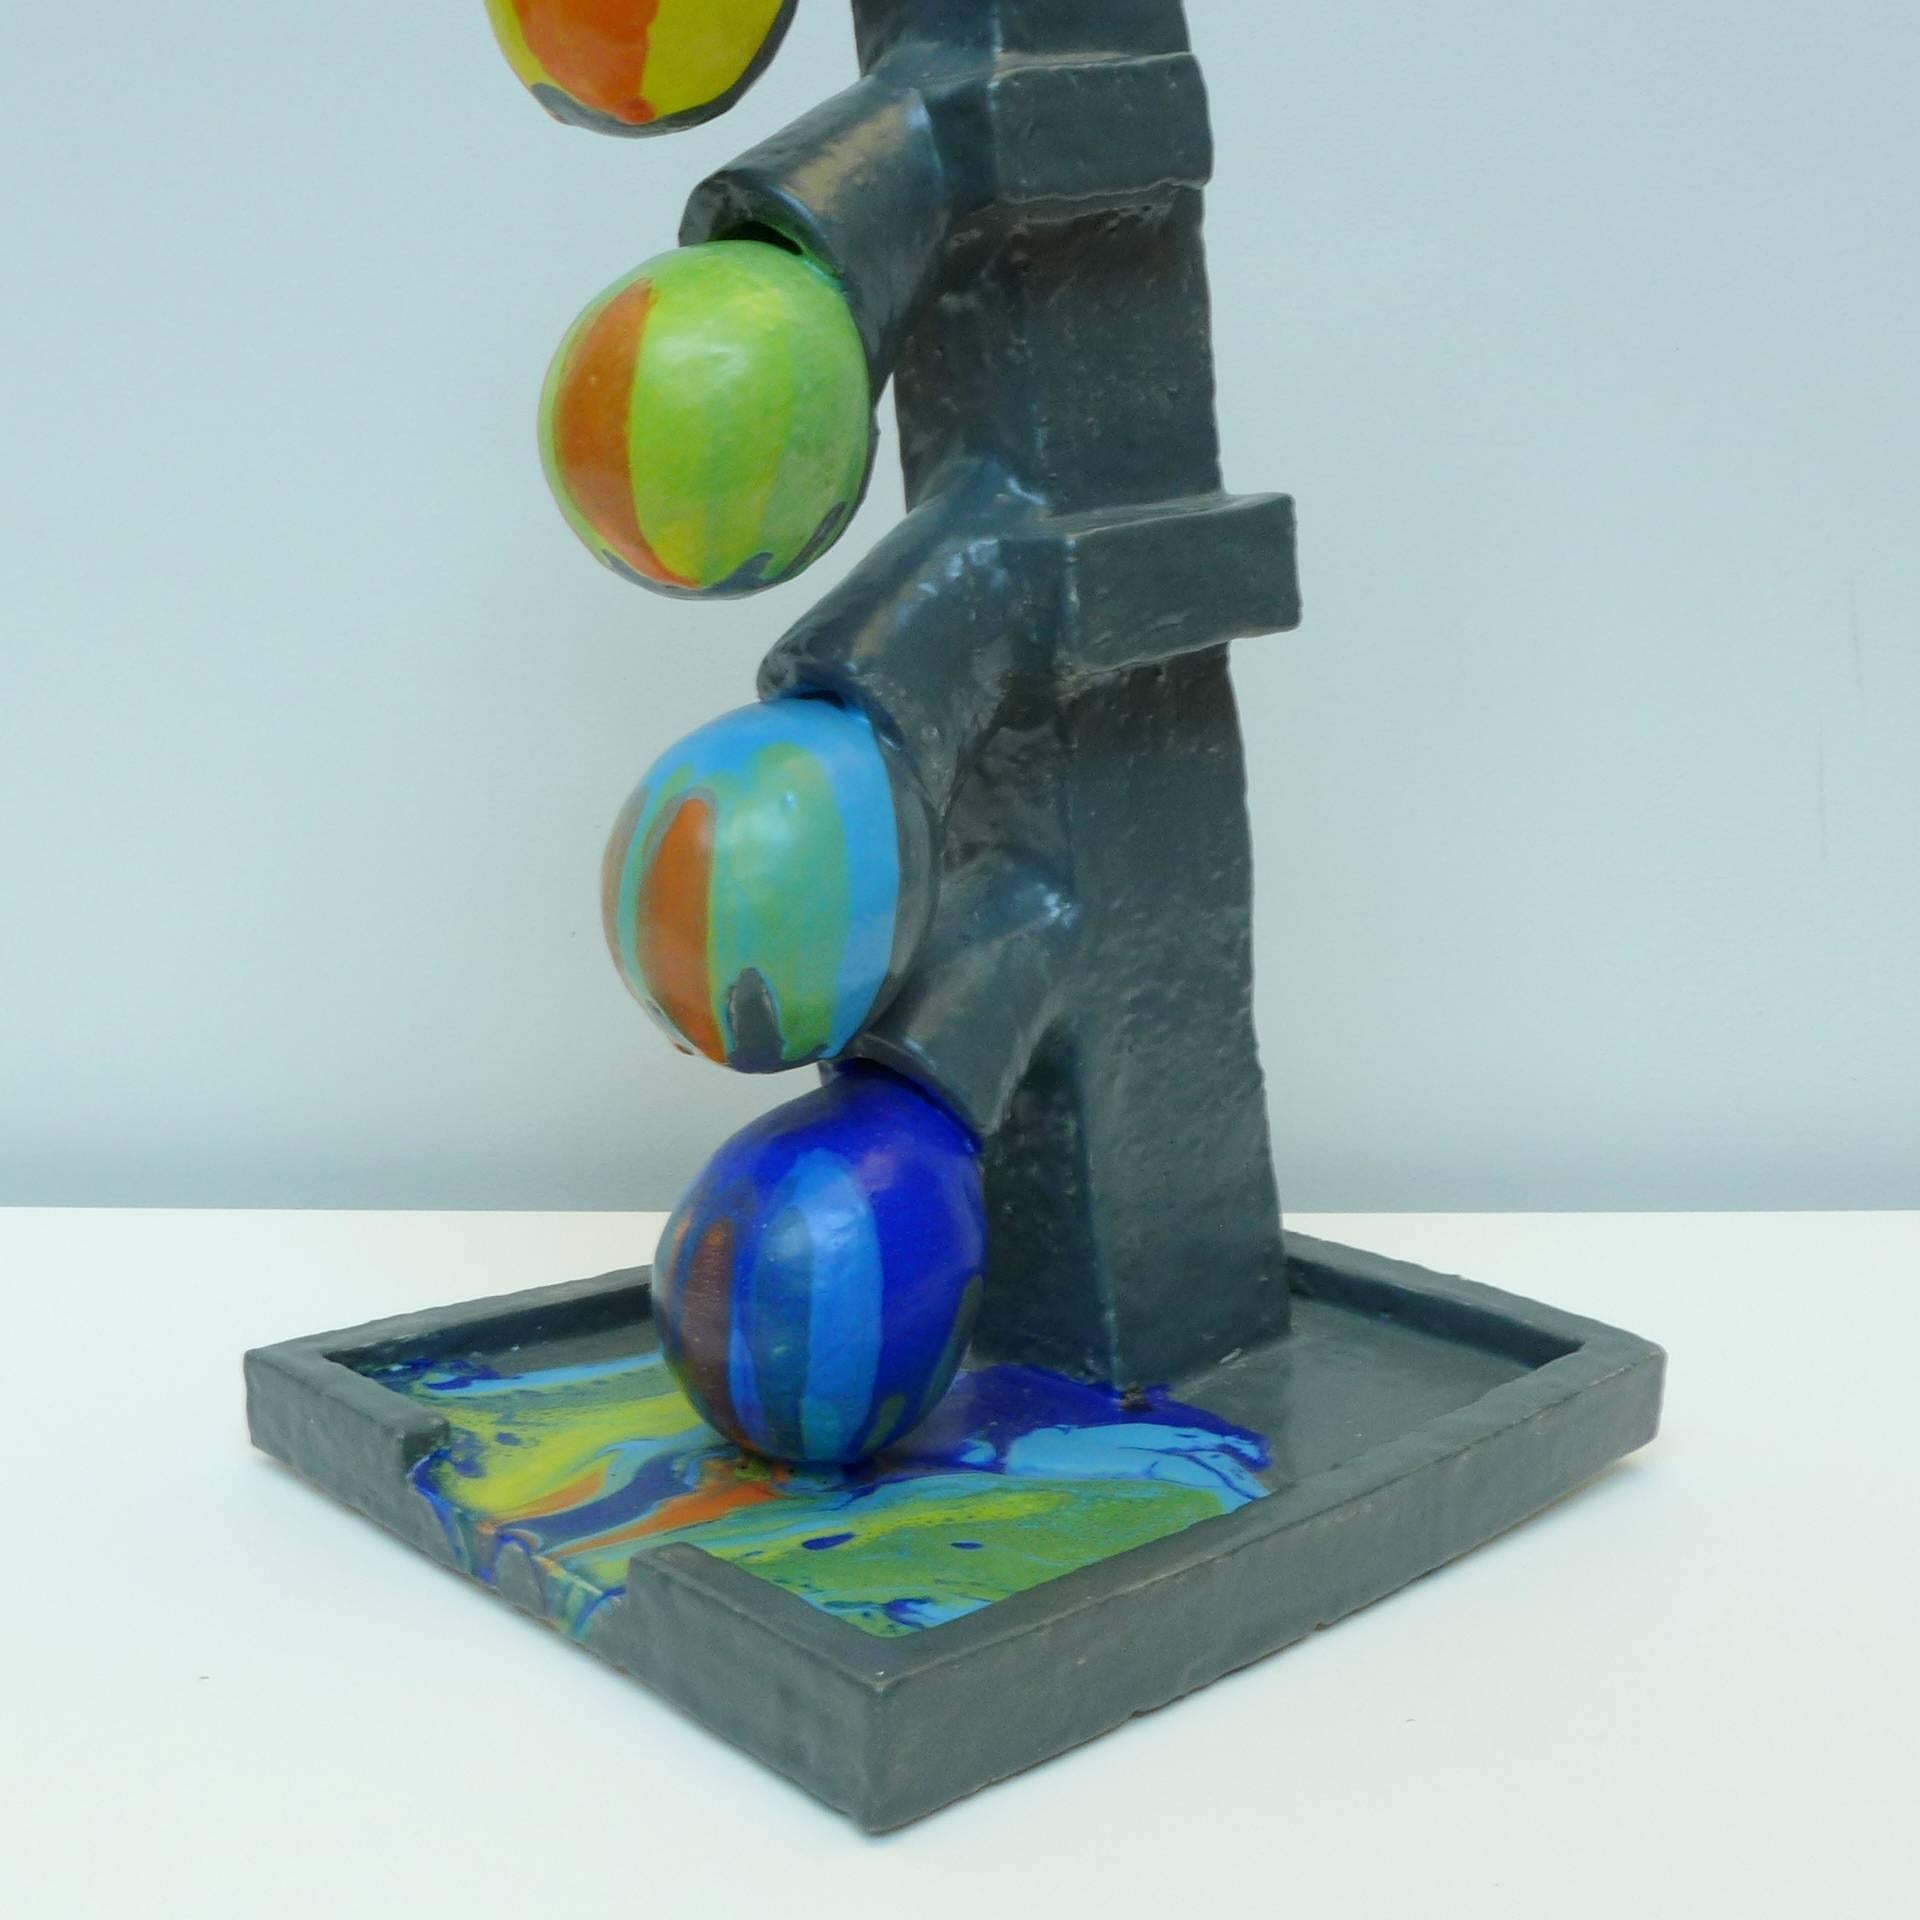 The artistic process of Mark Hosking explores an ongoing engagement in function, materiality, and process. Untitled - Self-glazing color flow is from a series of works experimenting with an automatic glazing process that pumps colored glaze inside